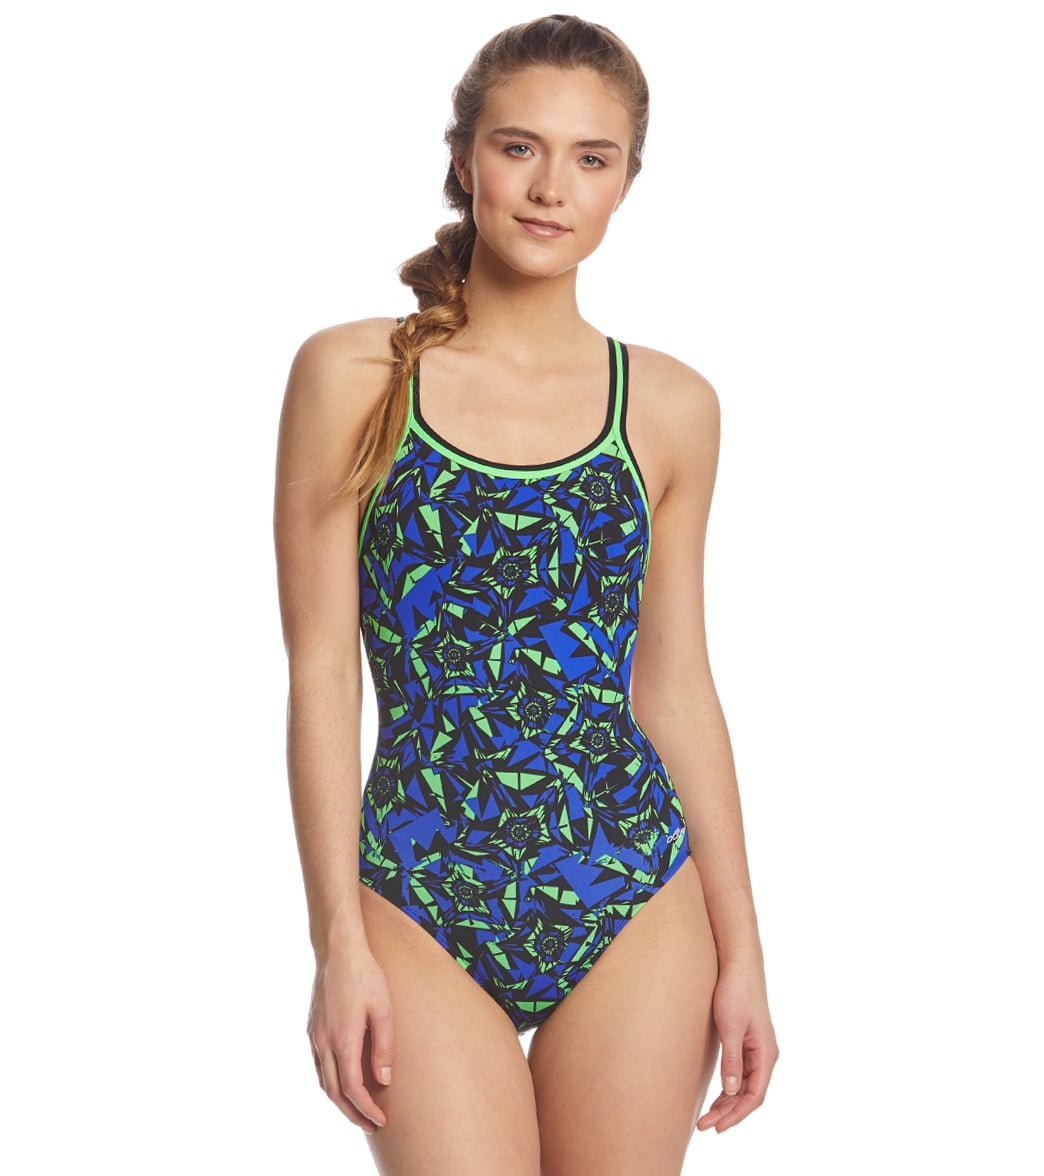 Dolfin Reliance Women's Ion Dbx V-Back One Piece Swimsuit - Blue/Green 28 Polyester - Swimoutlet.com